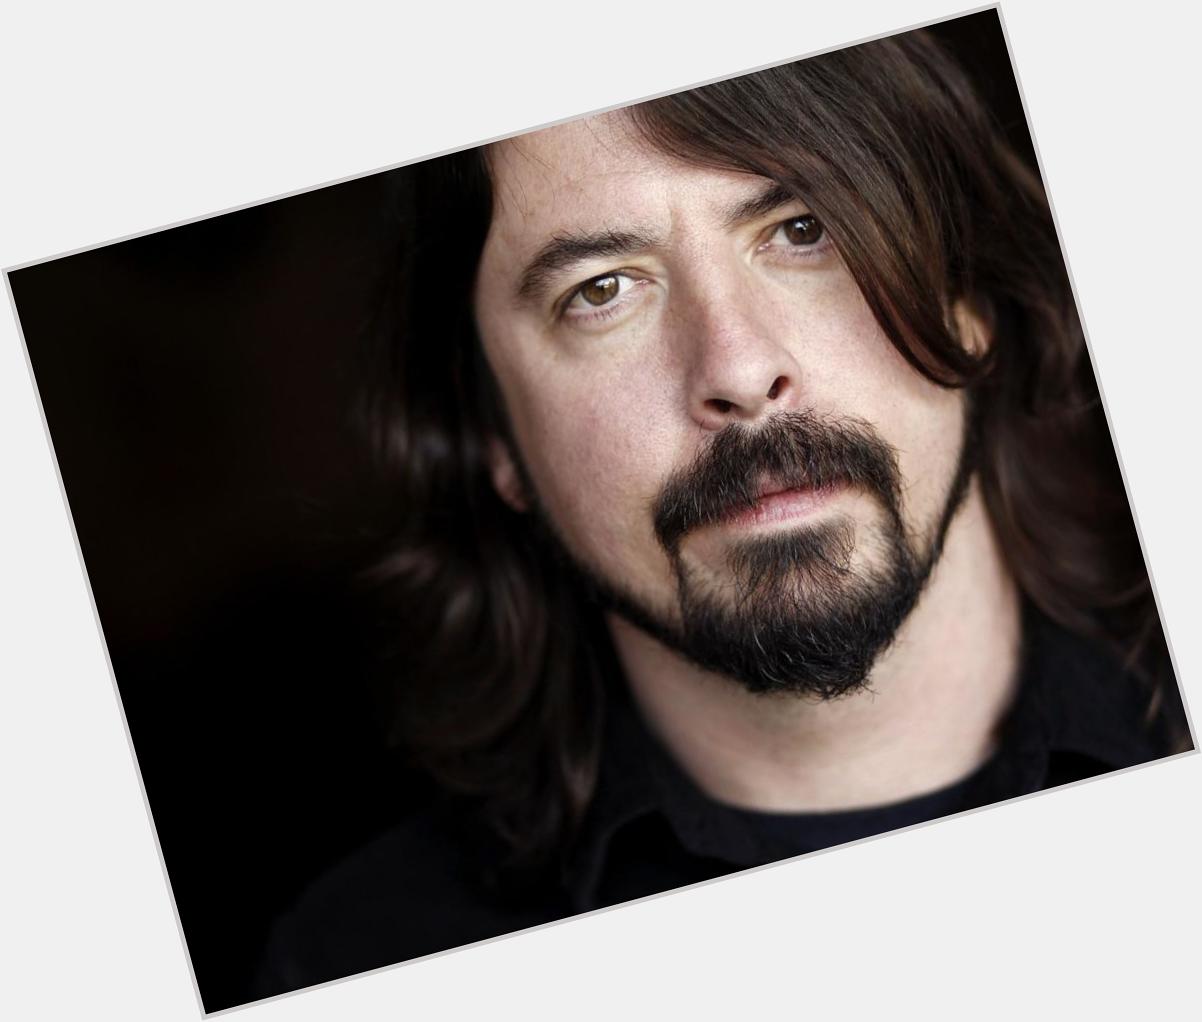 HAPPY BIRTHDAY
DAVE GROHL!! 